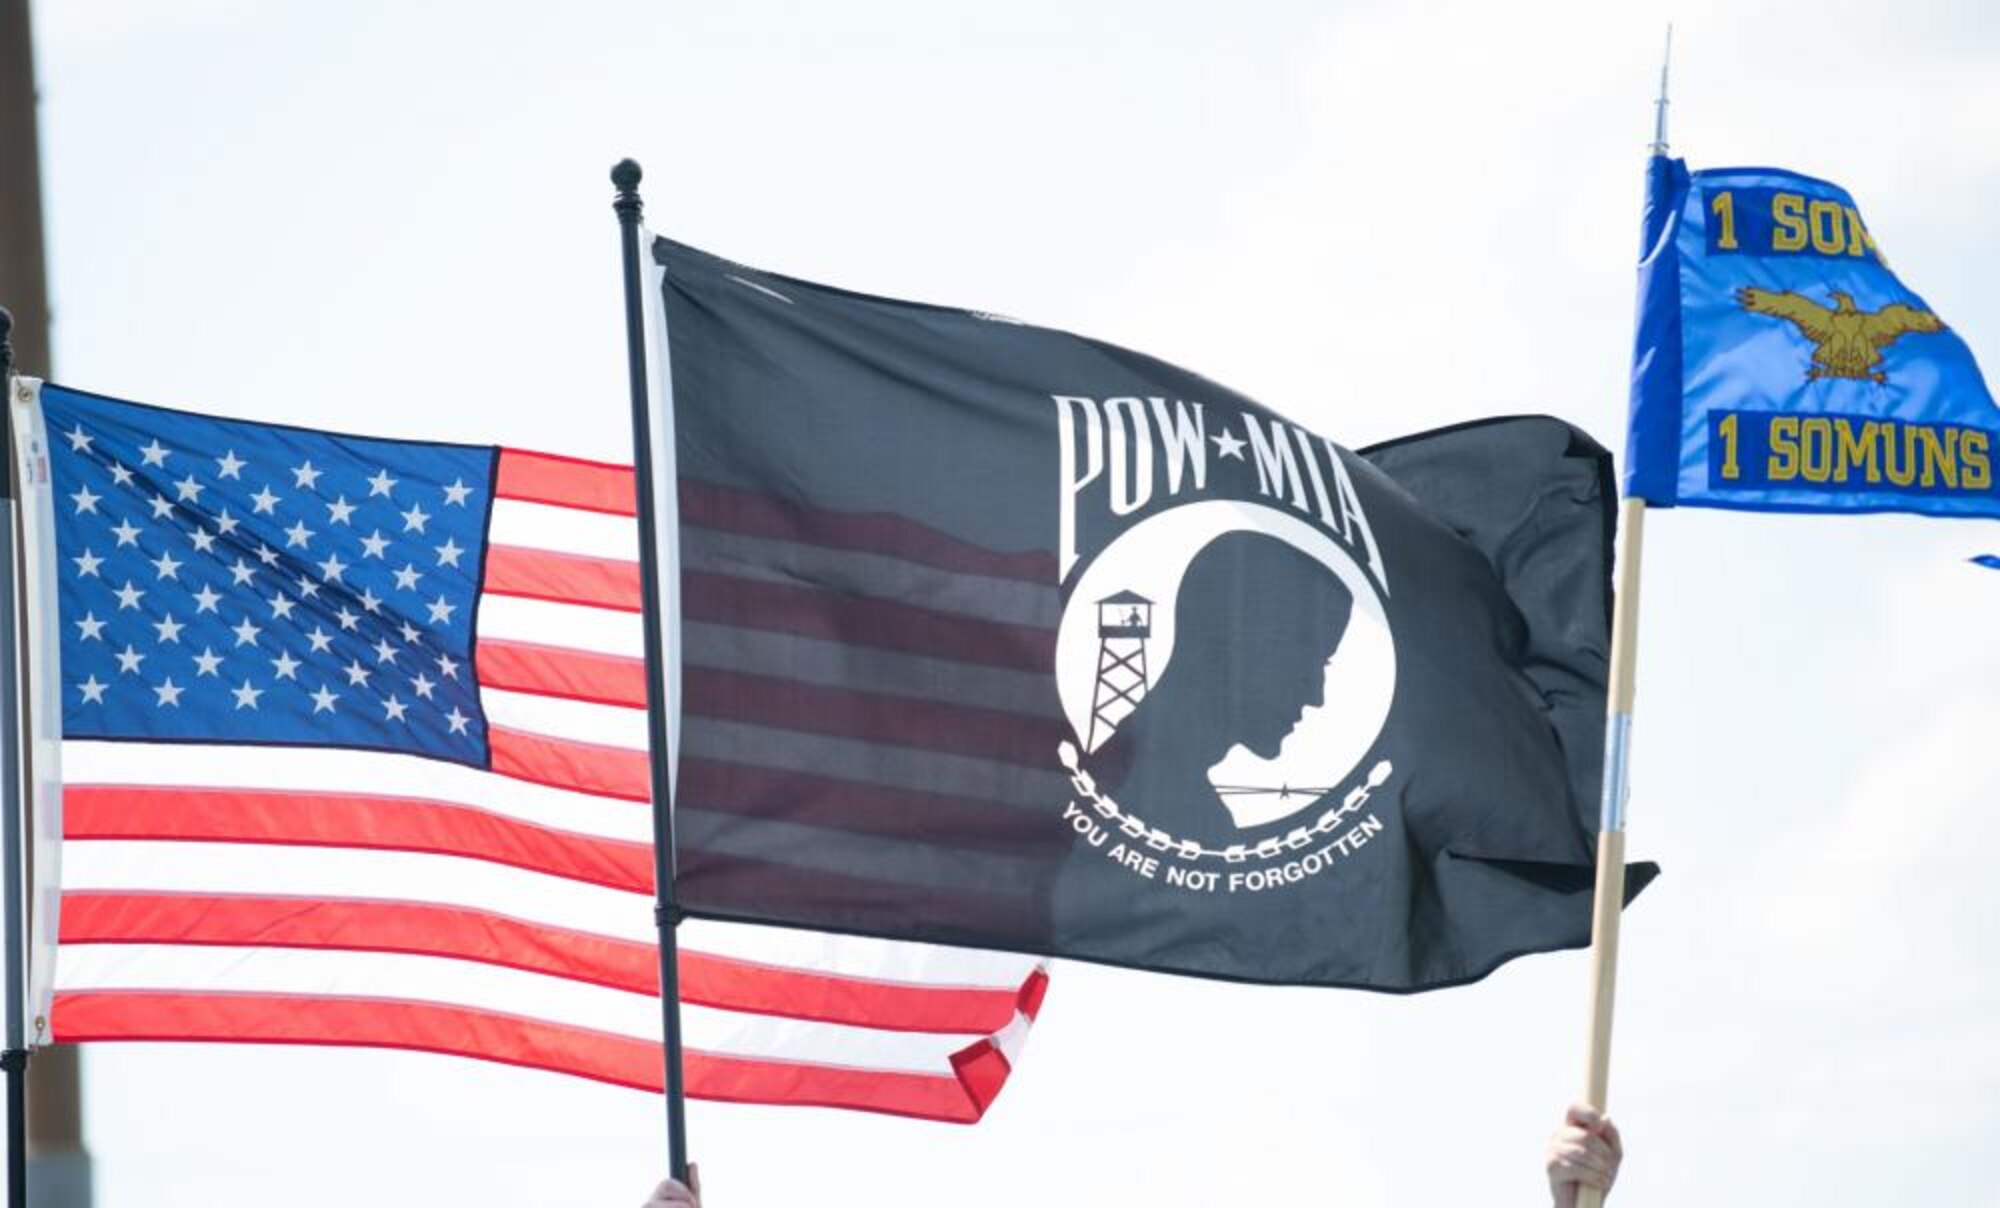 The run serves to honor and remember POW/MIA American service members from World War II, the Korean War, the Vietnam War, the Cold War, the Gulf Wars and other recent conflicts.